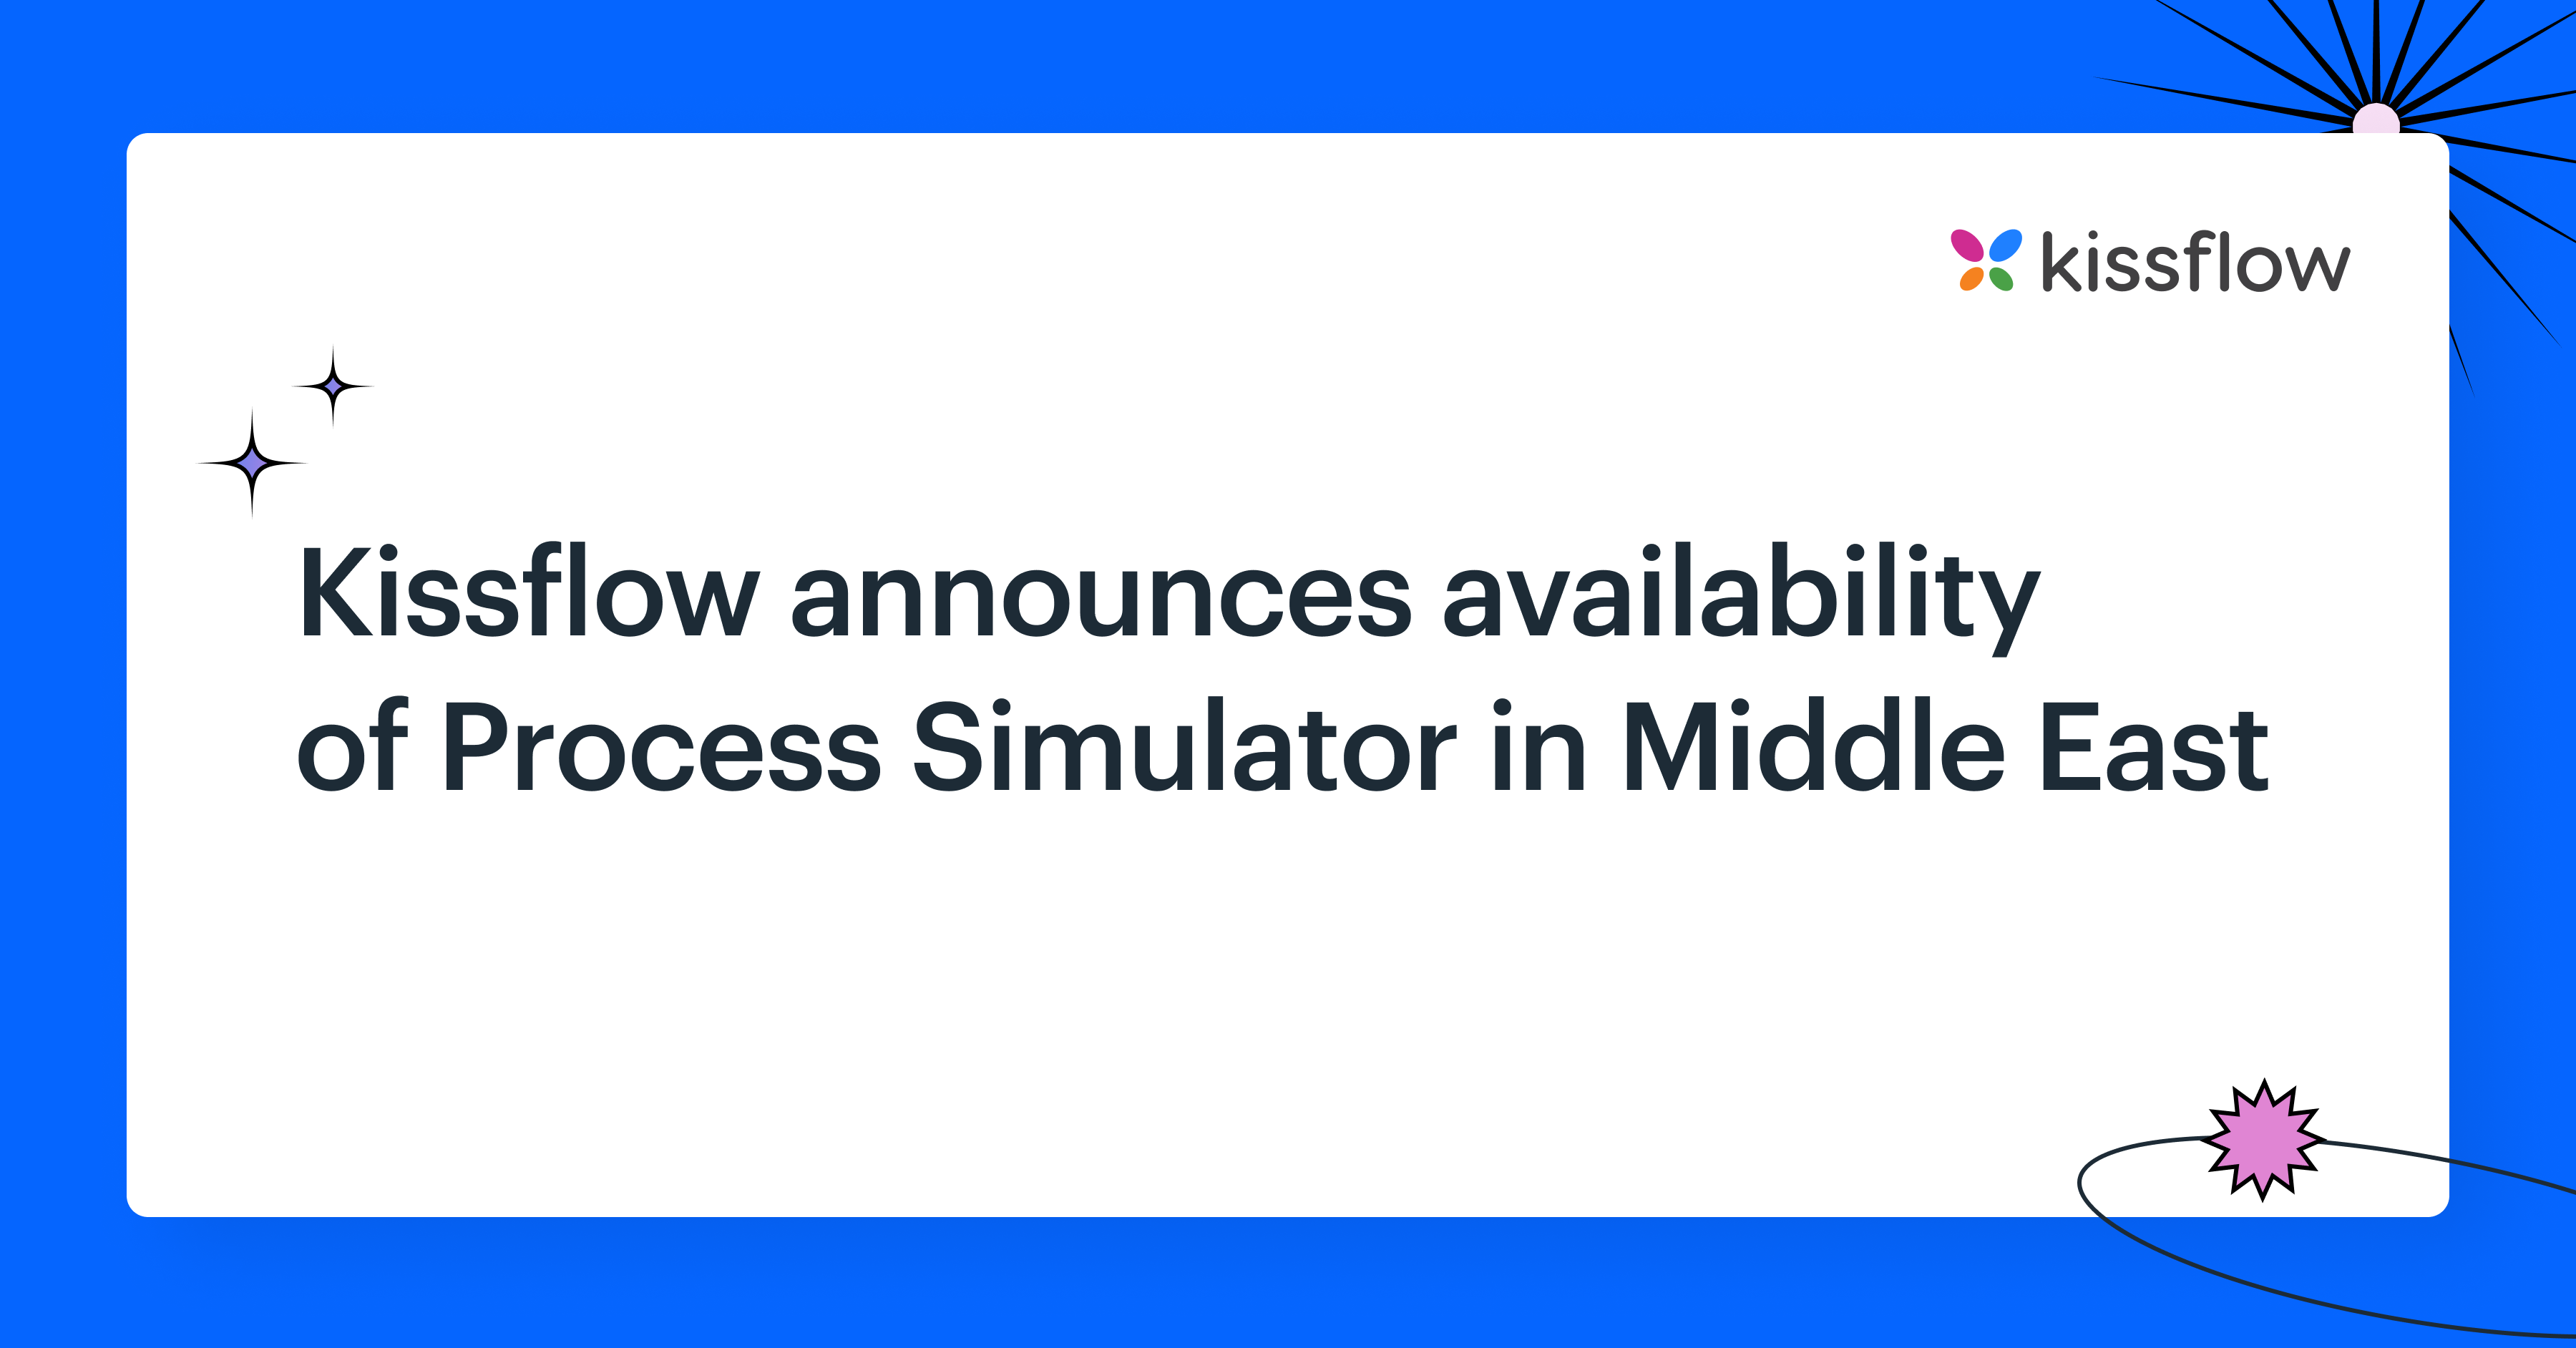 Kissflow announces availability of Process Simulator in Middle East